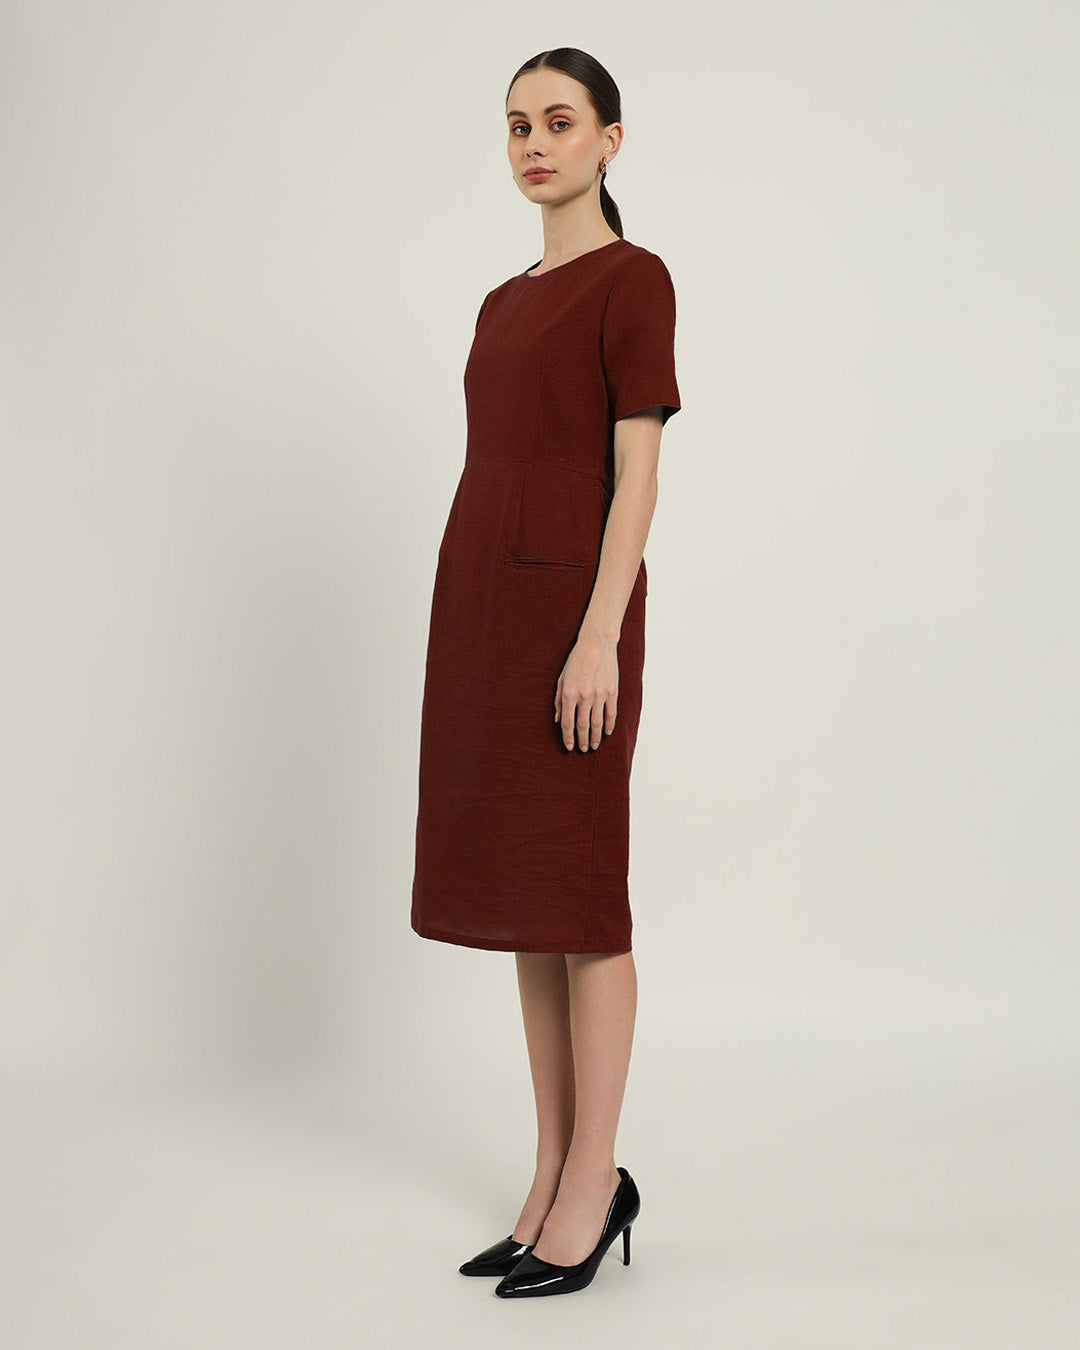 The Cairo Rouge Dress